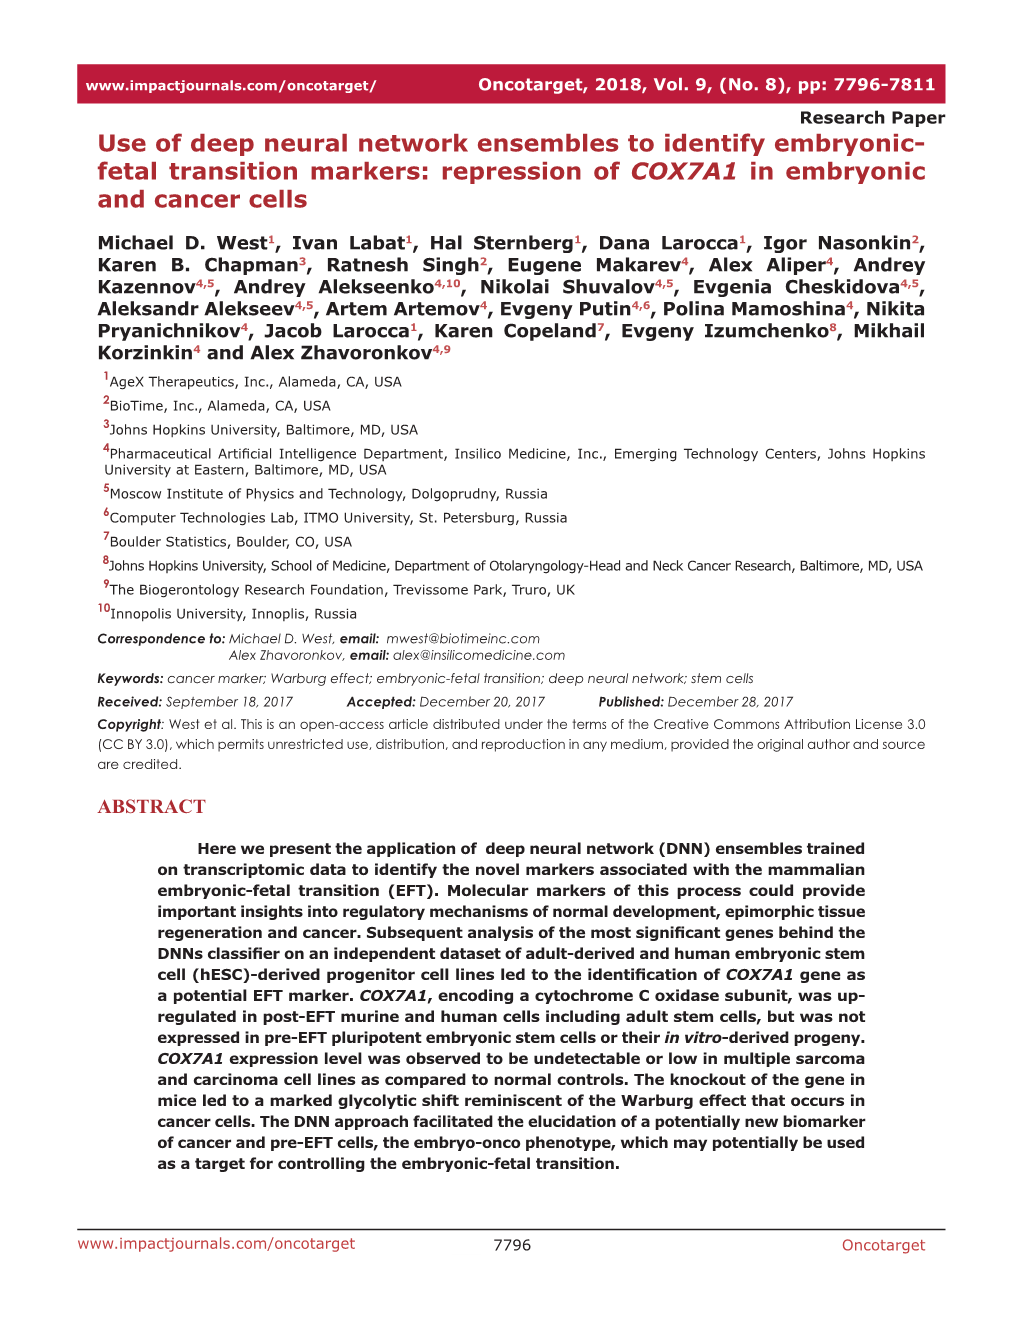 Repression of COX7A1 in Embryonic and Cancer Cells